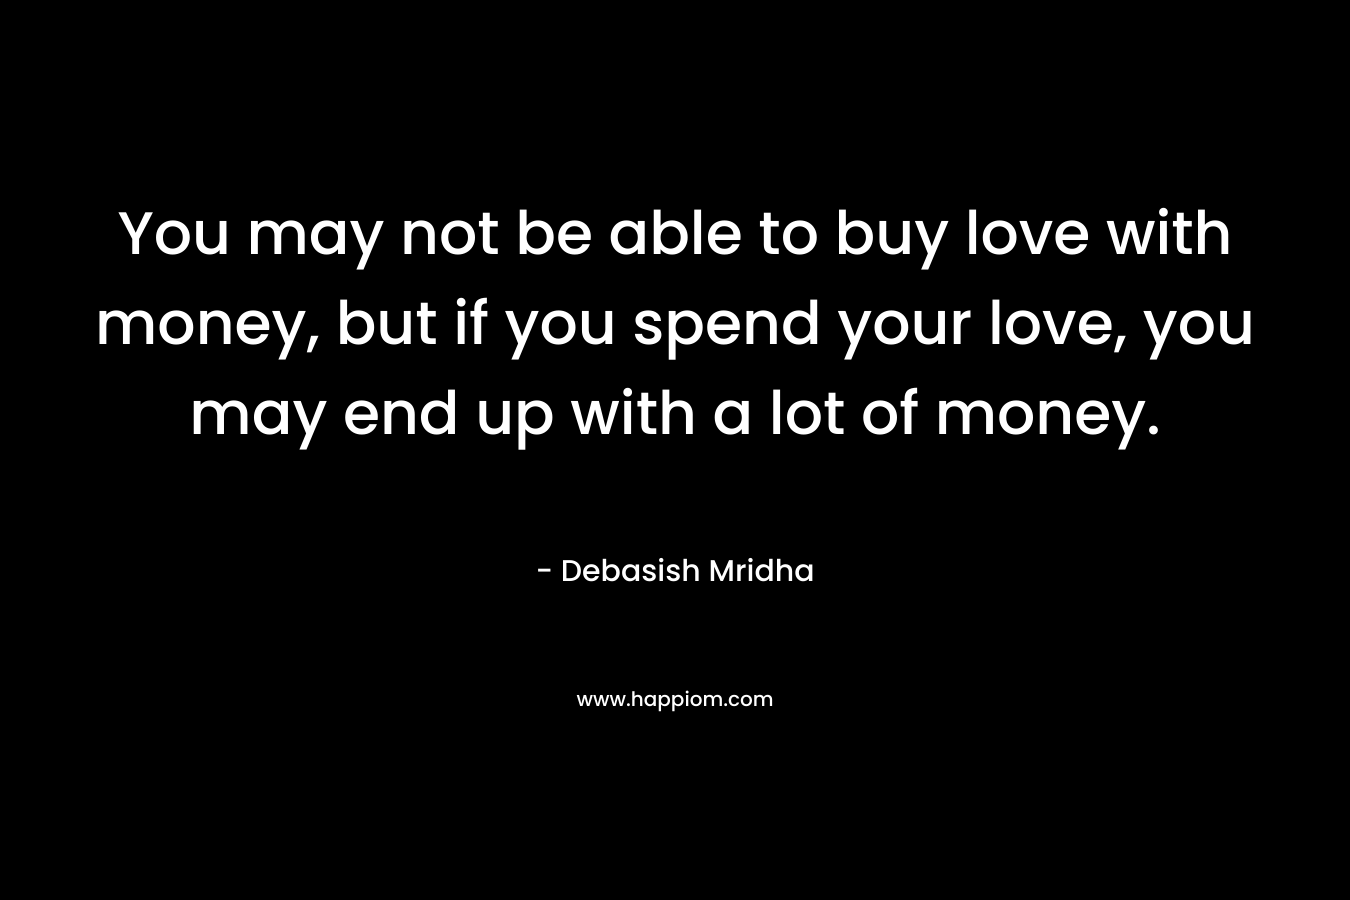 You may not be able to buy love with money, but if you spend your love, you may end up with a lot of money.